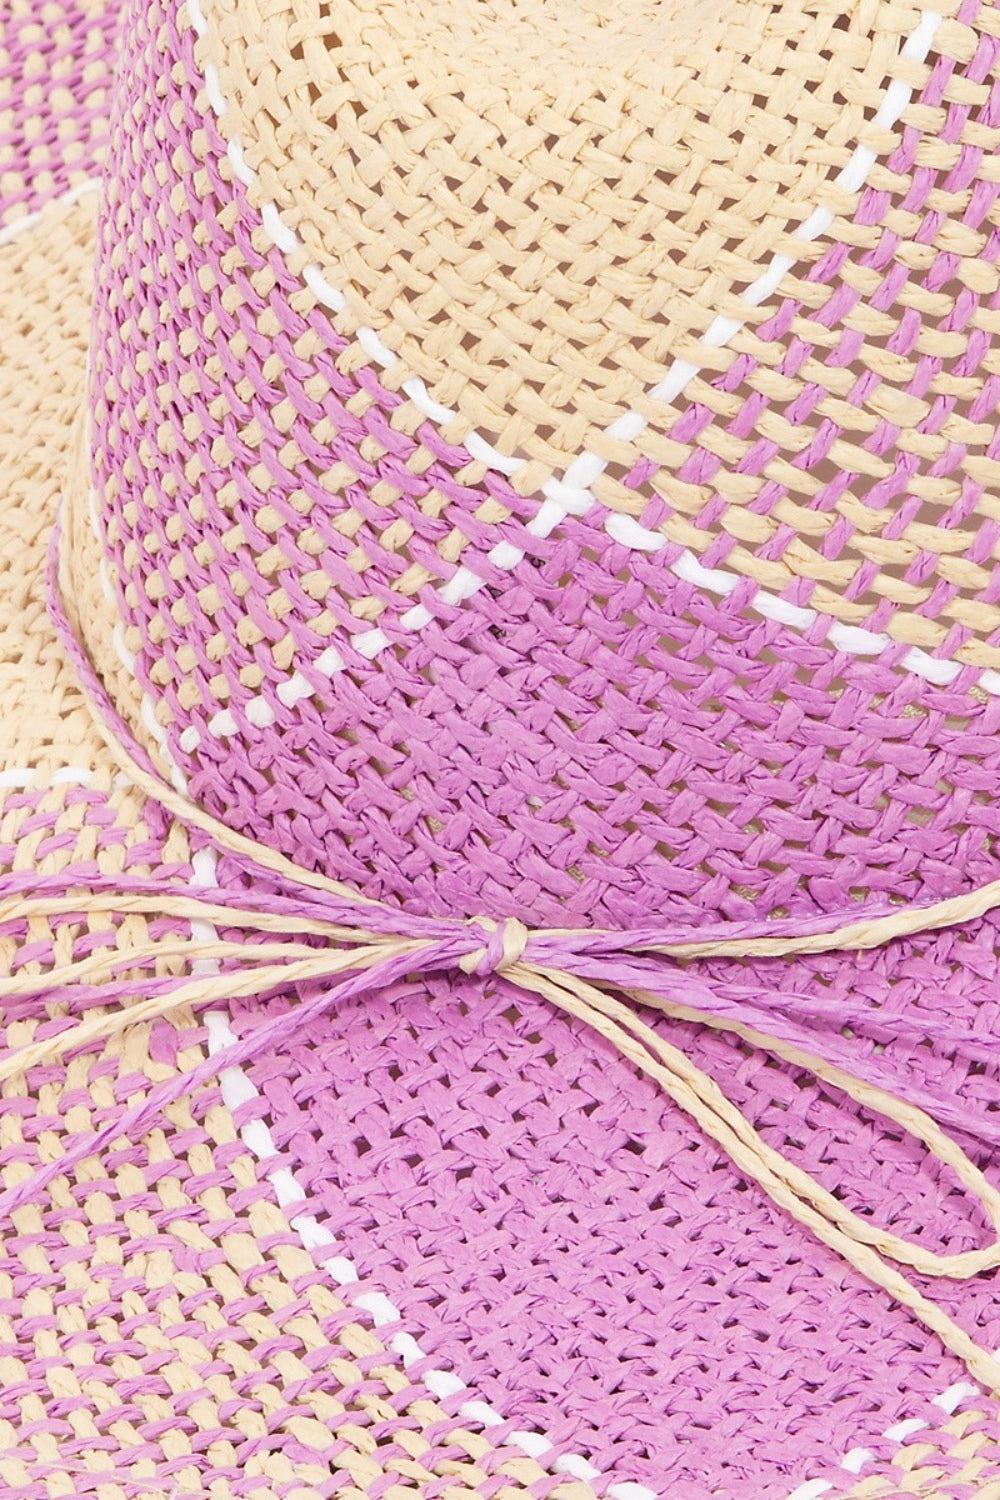 Contrast Straw Braided Hat | Multiple Colors